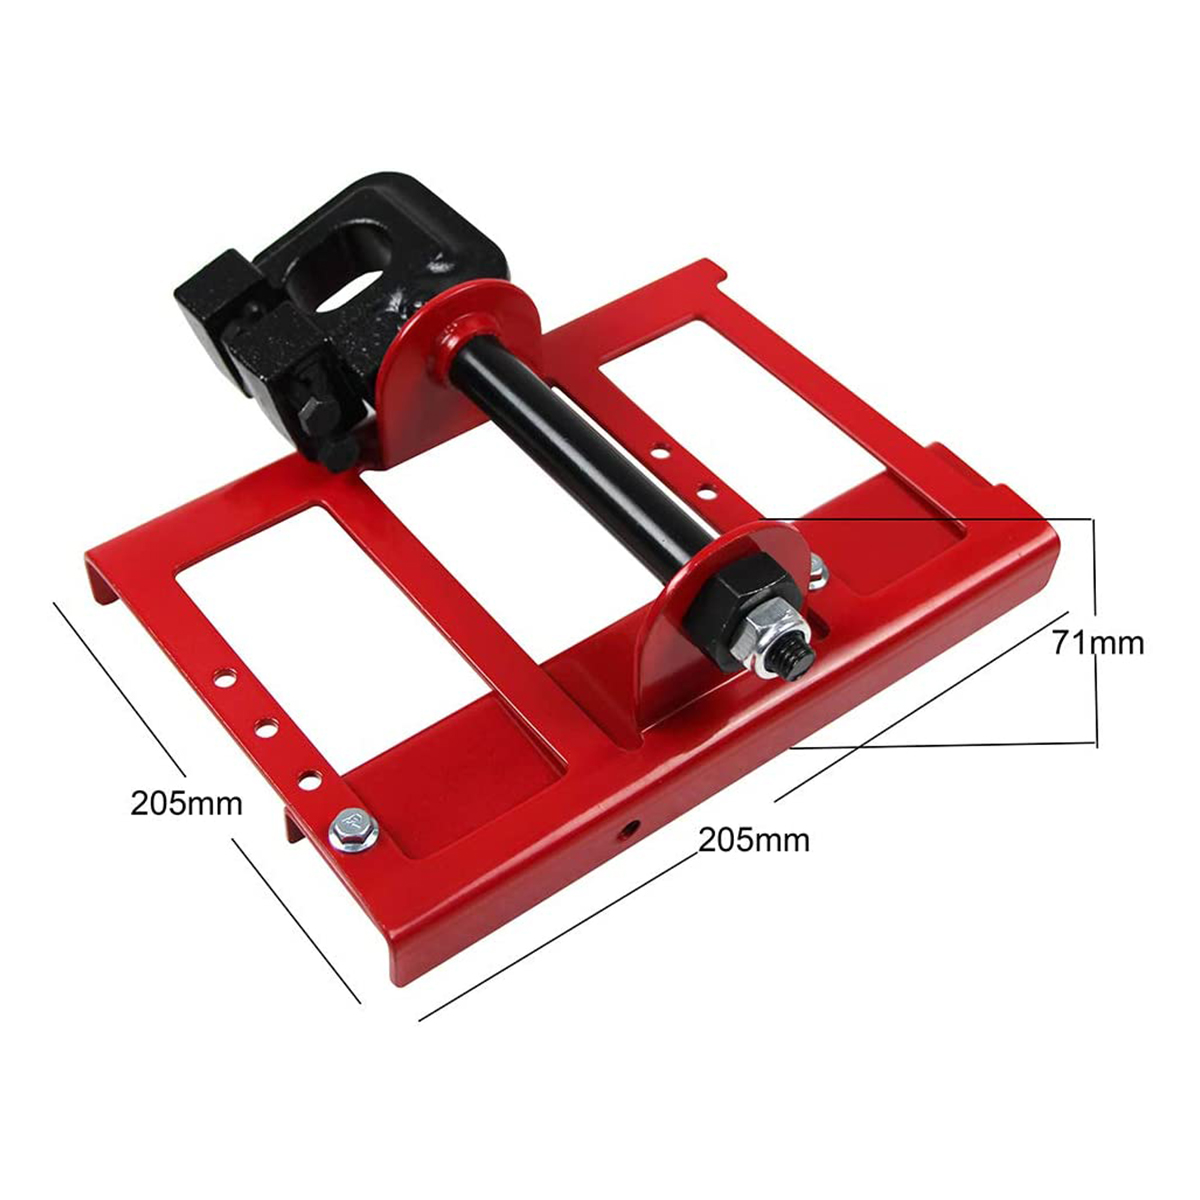 Lumber-Cutting-Guide-Steel-Timber-Tuff-Chainsaw-Attachment-Saw-Cut-Guided-1777898-7